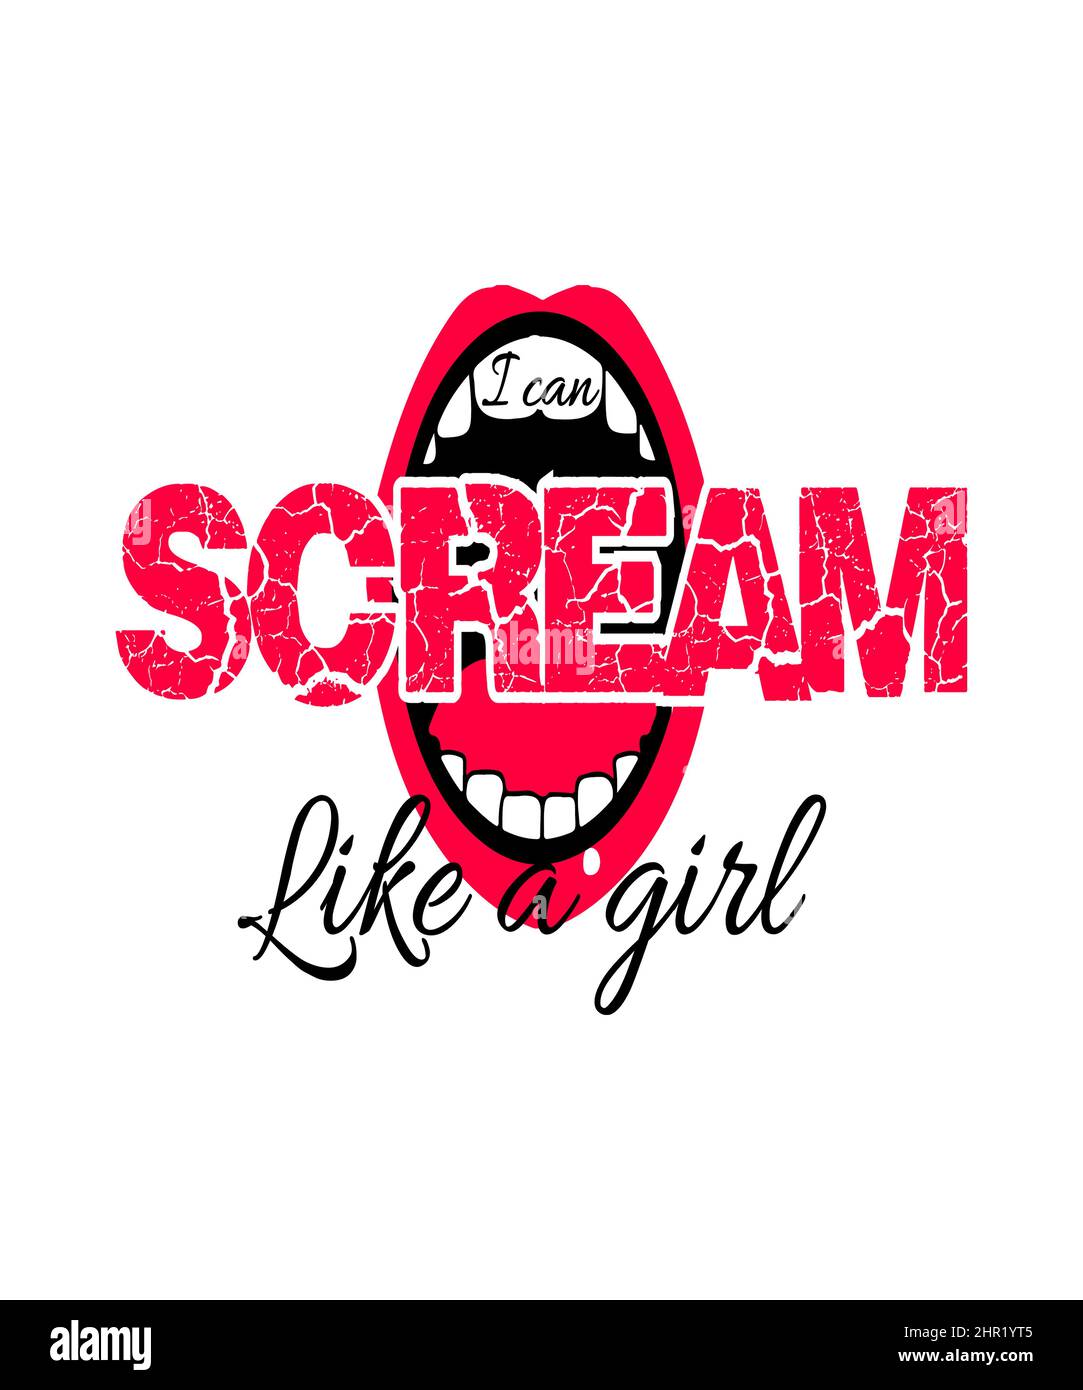 I can scream like a girl graphic illustration with cracked text and a mouth on a white background. Stock Photo